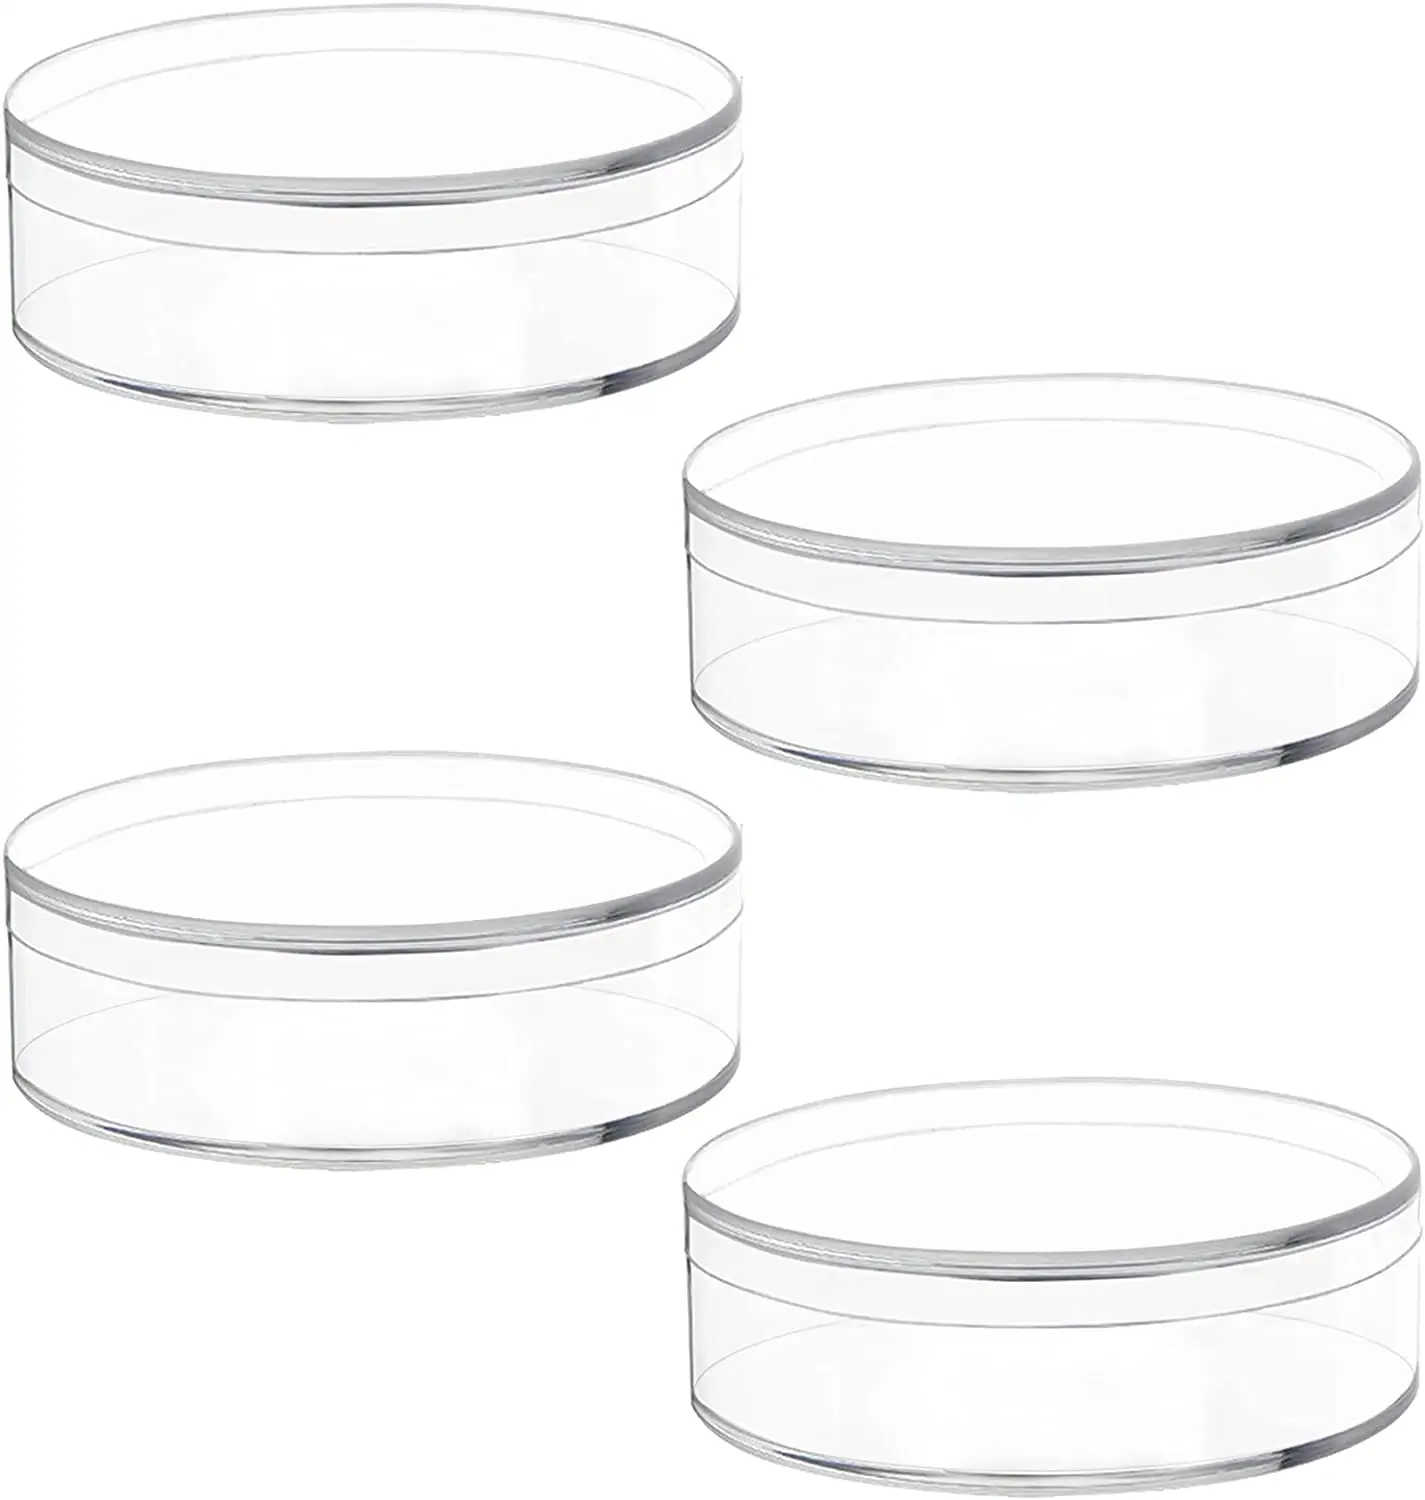 80mm Round Clear Storage Acrylic Organizer Box 4 Pack Stackable Small Plastic Box Candy Container Acrylic Box with Lids